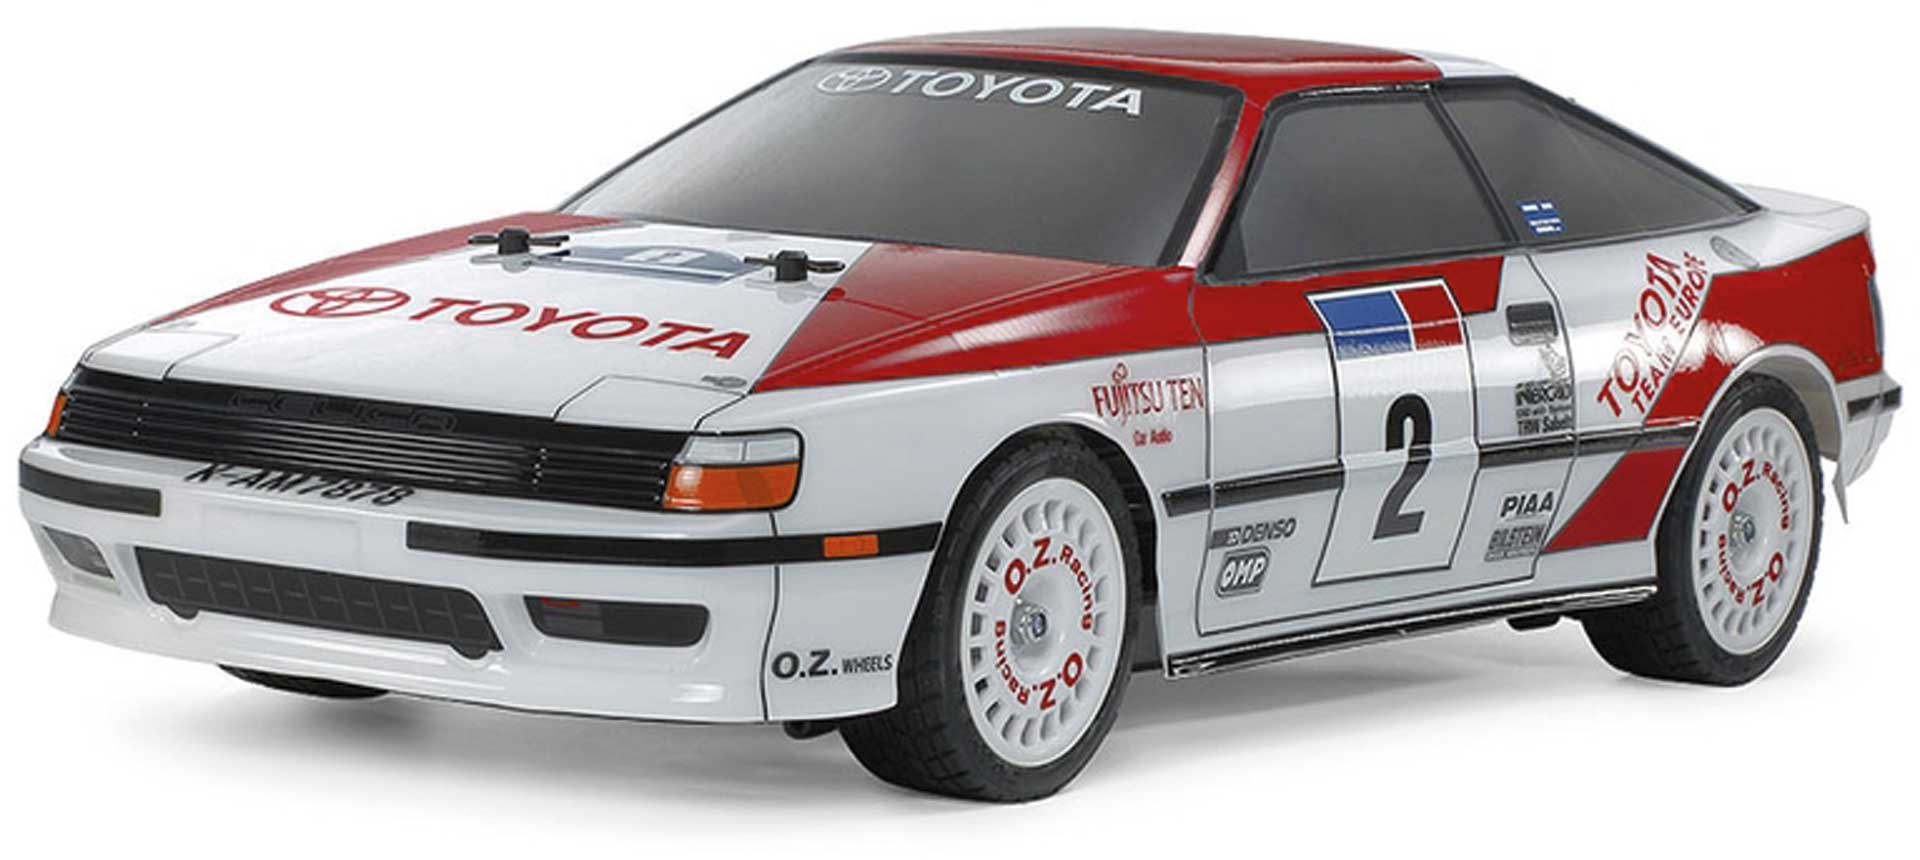 TAMIYA Toyota Celica GT-Four TT-02 1/10 4WD Kit with painted body